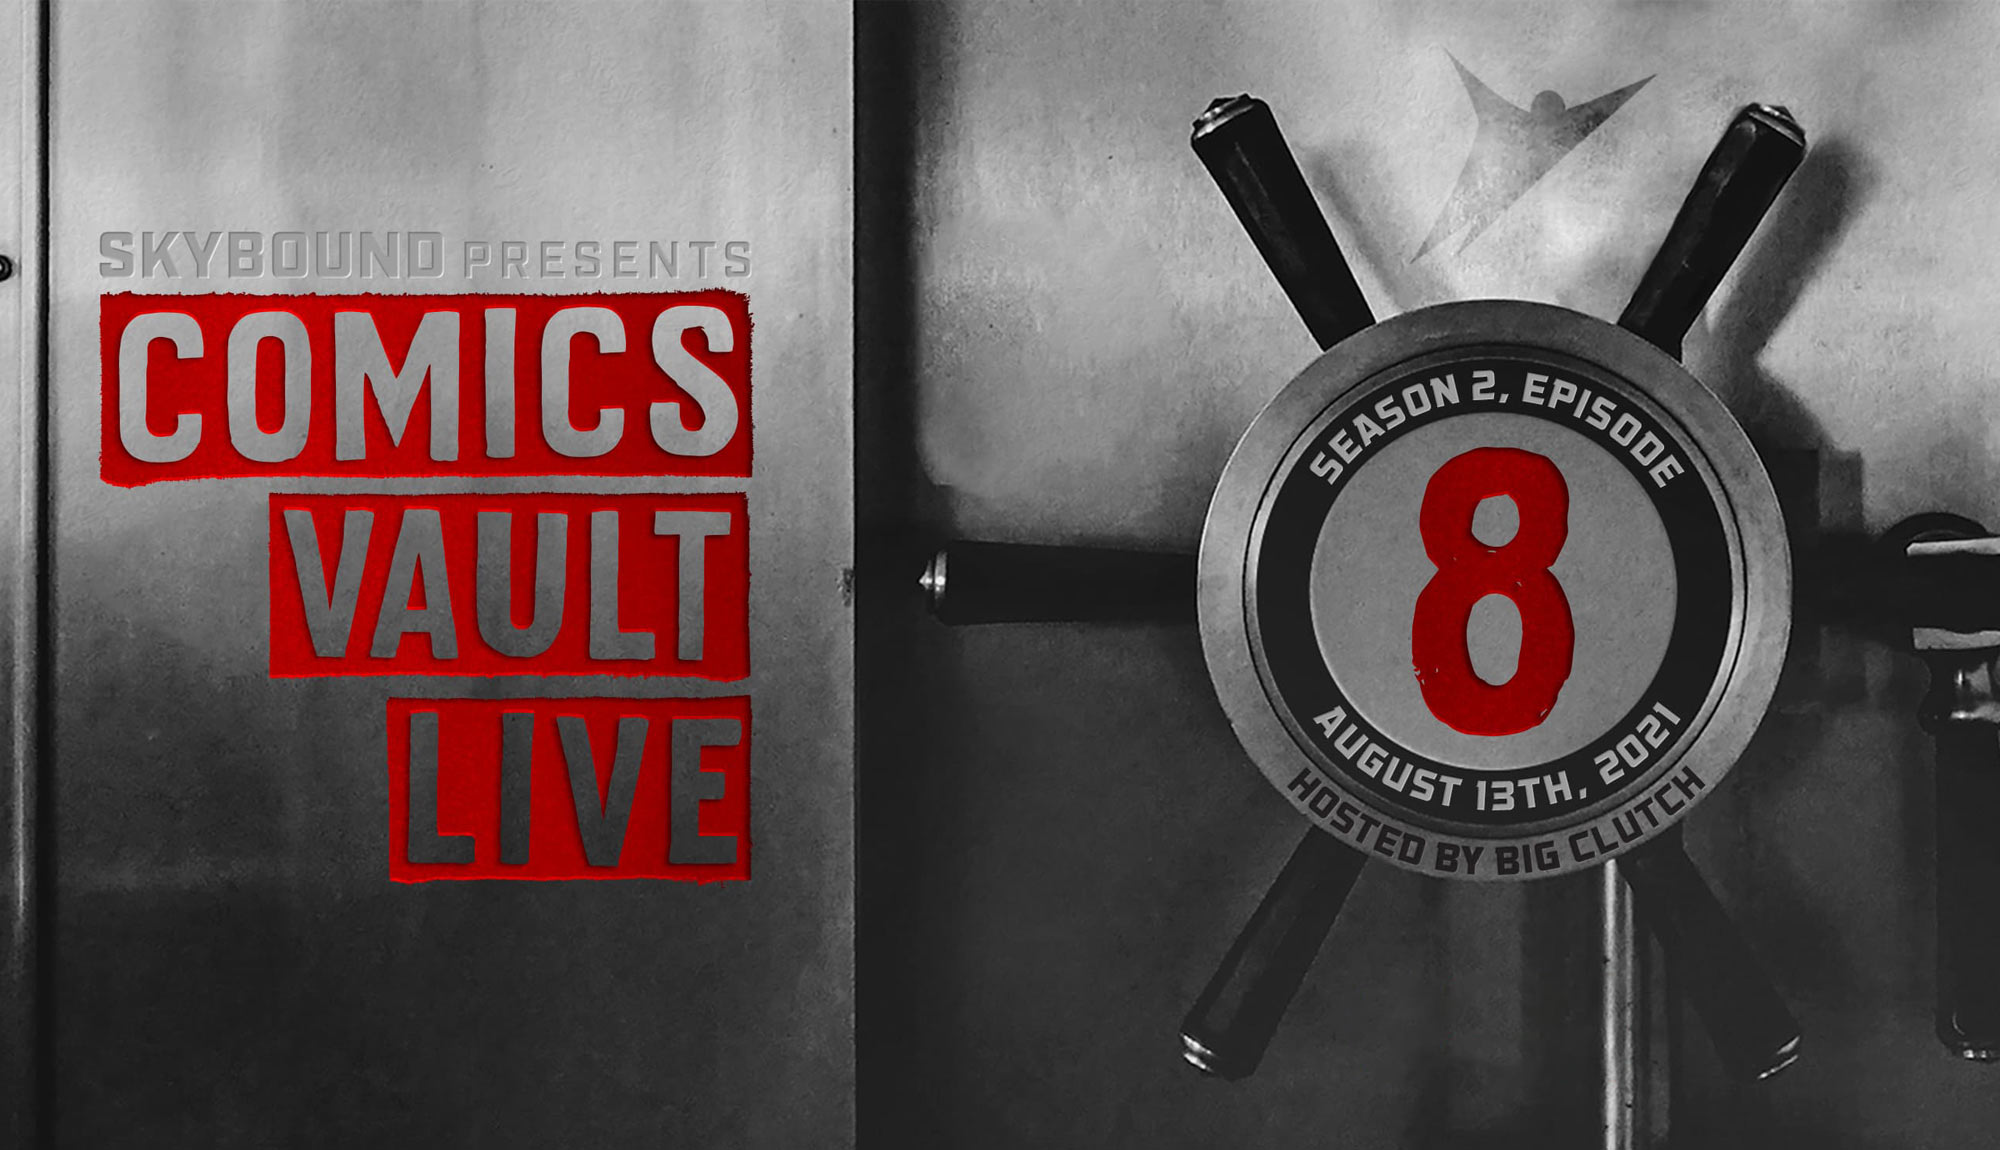 Comics Vault Live Makes History on Friday, August 13!